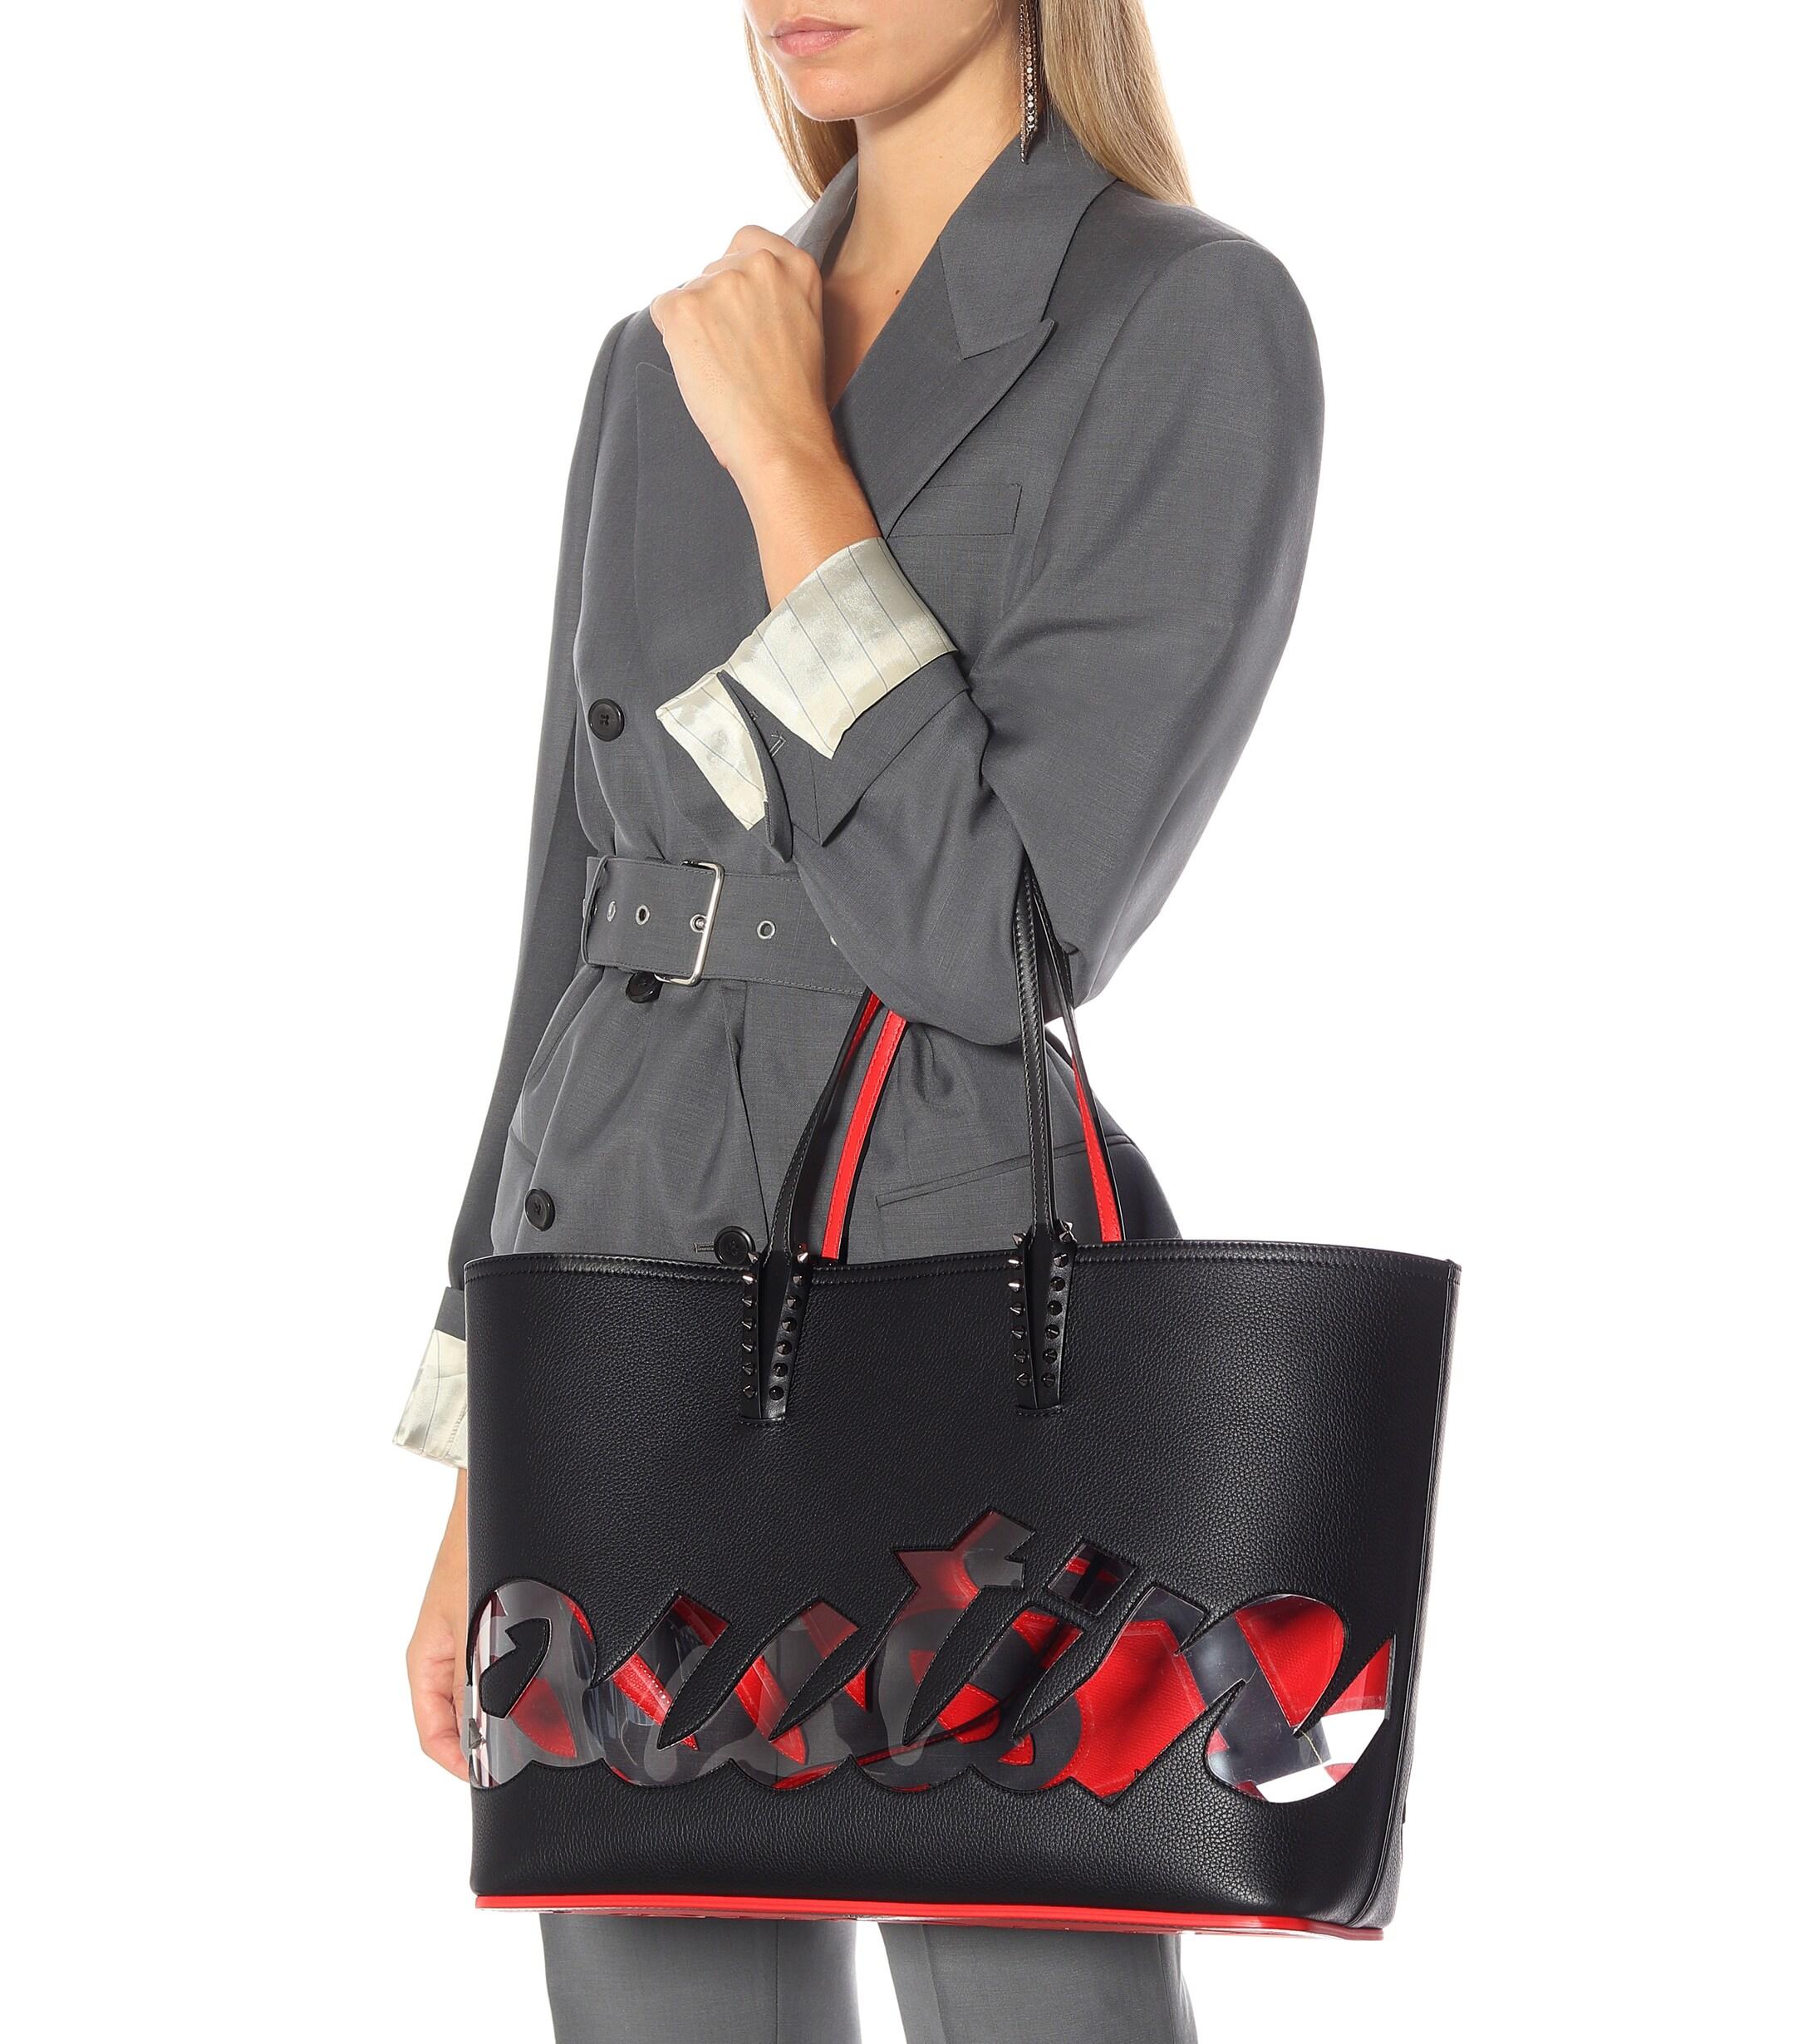 Christian Louboutin Cabata Logo Leather Tote in Black | Lyst